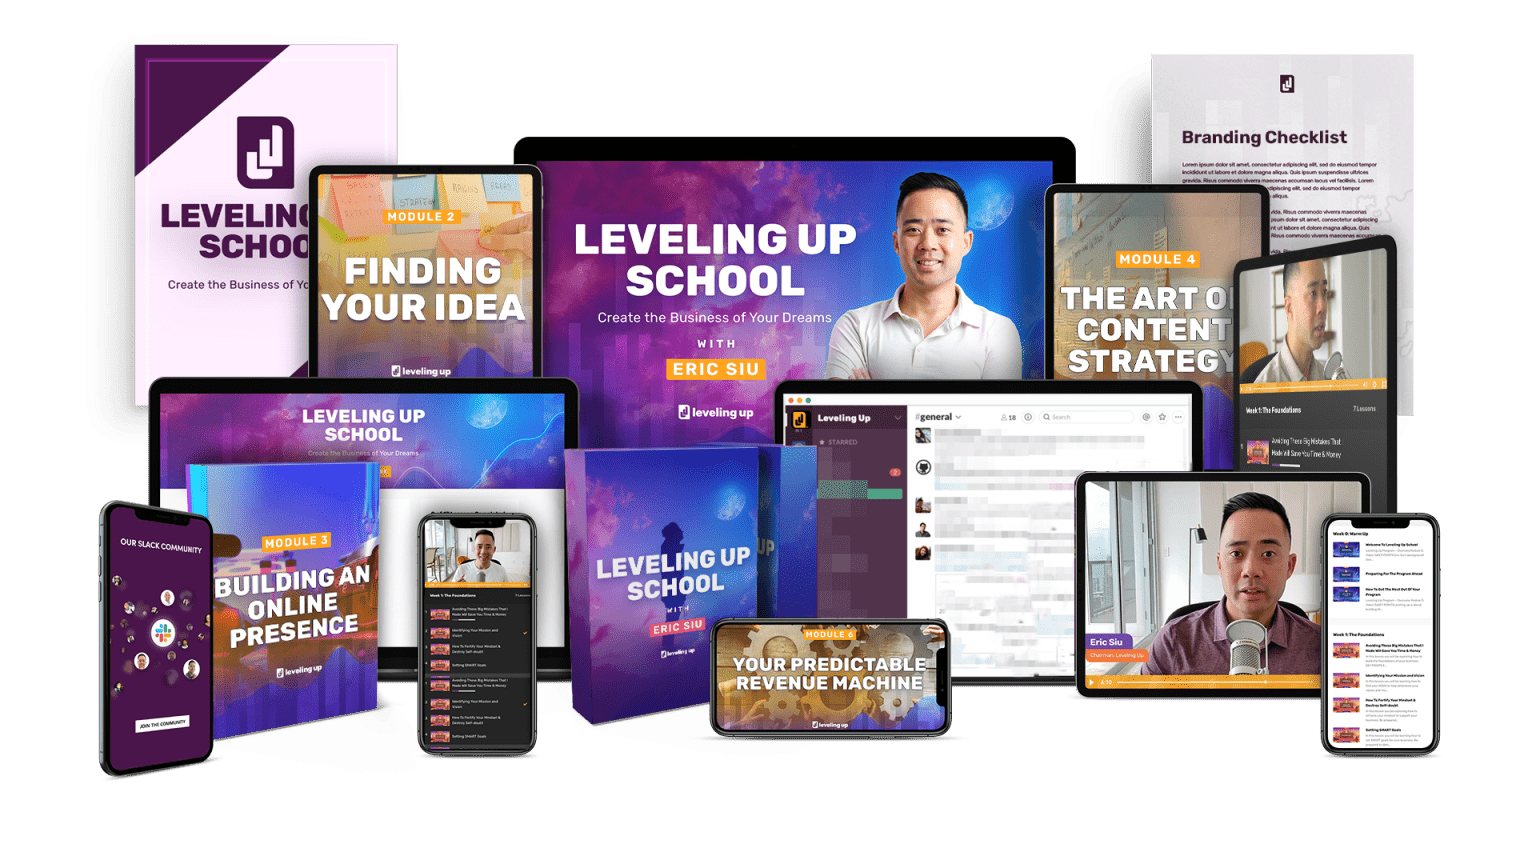 Download All Courses